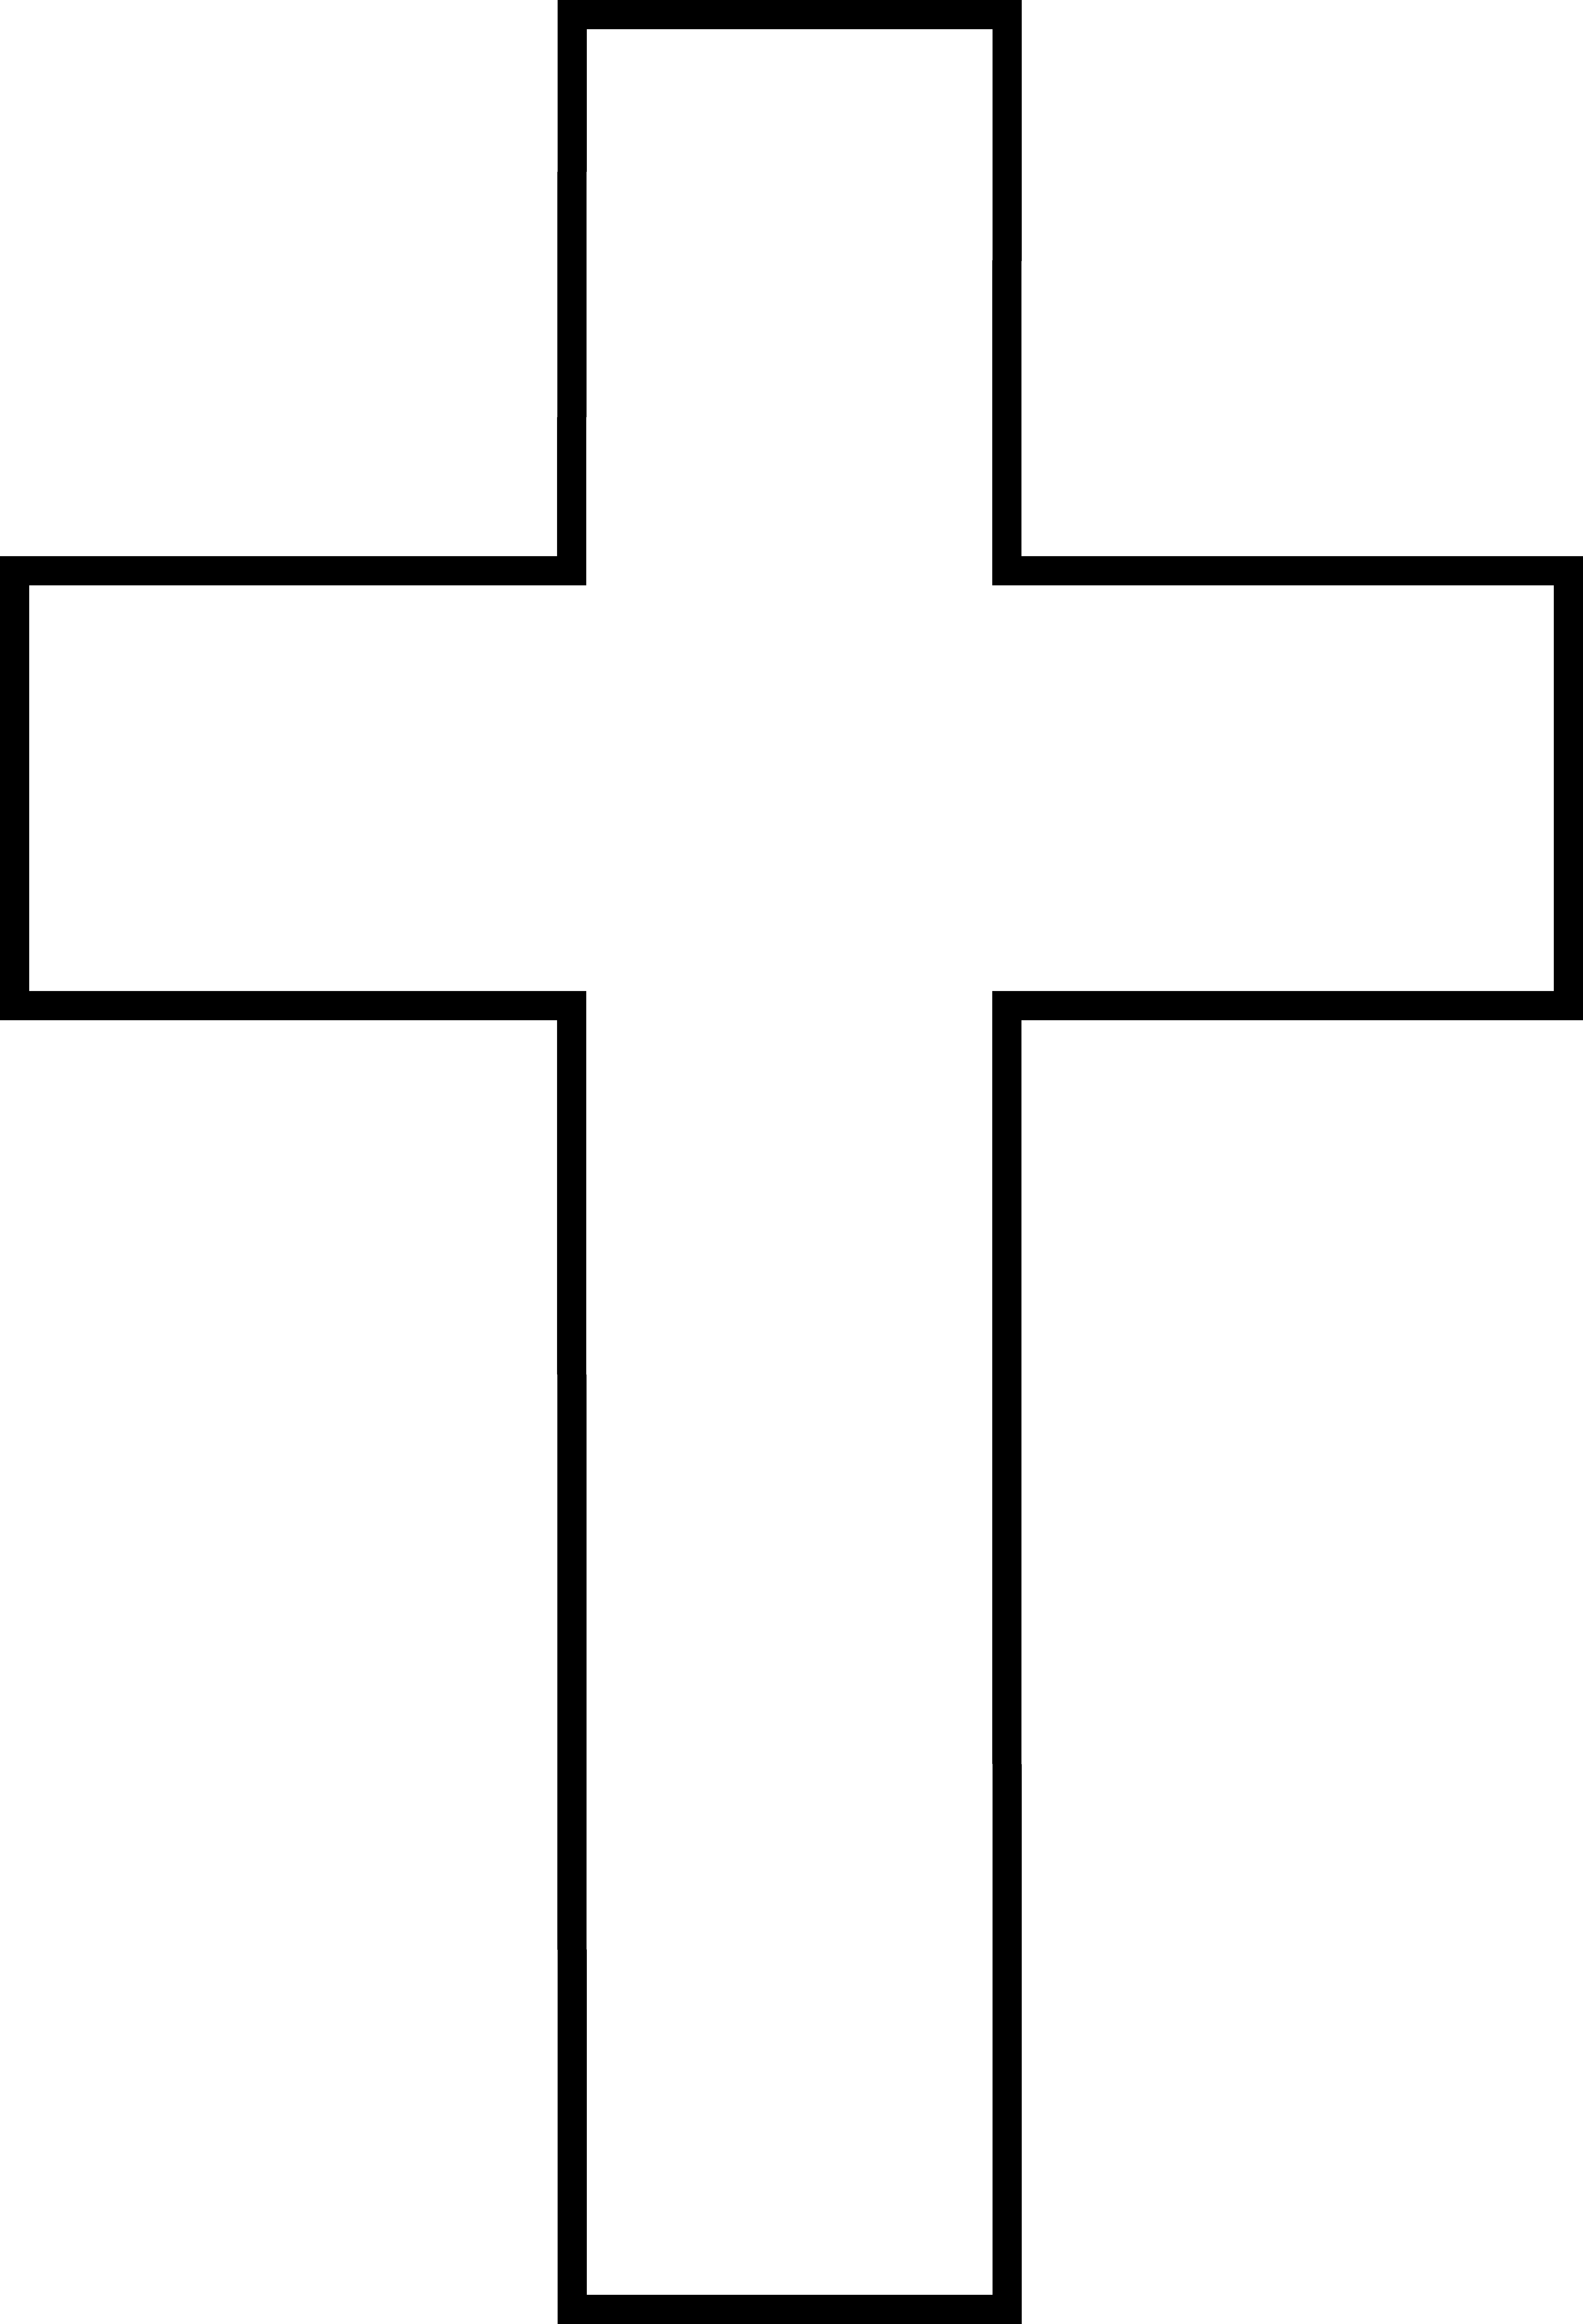 Nail clipart cross. Free black and white